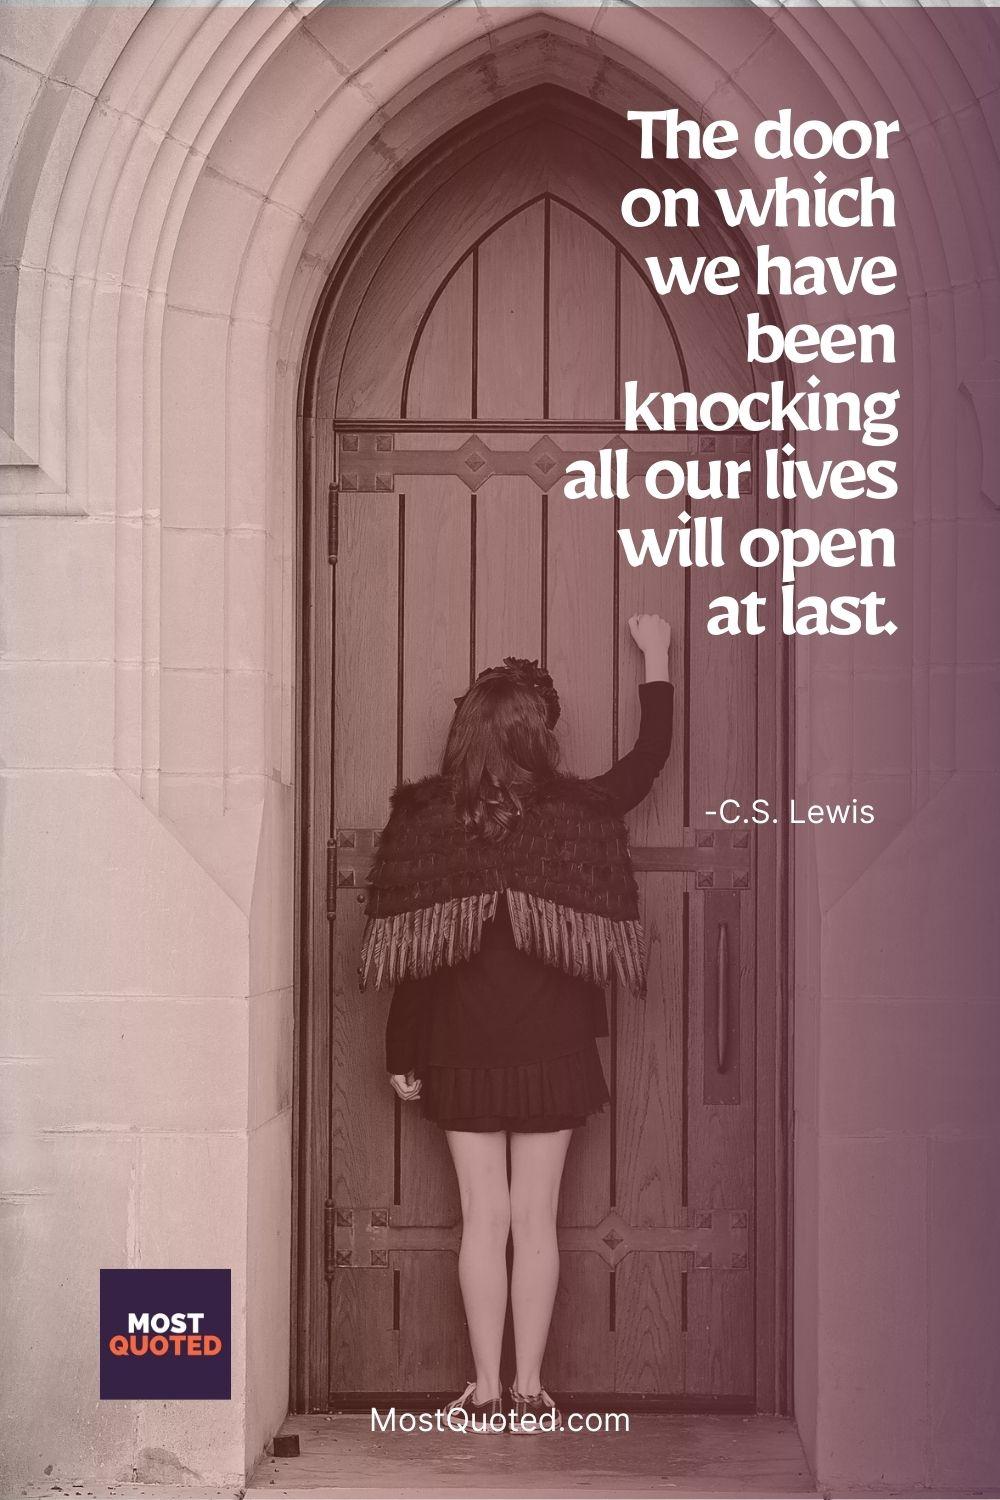 The door on which we have been knocking all our lives will open at last. - C.S. Lewis